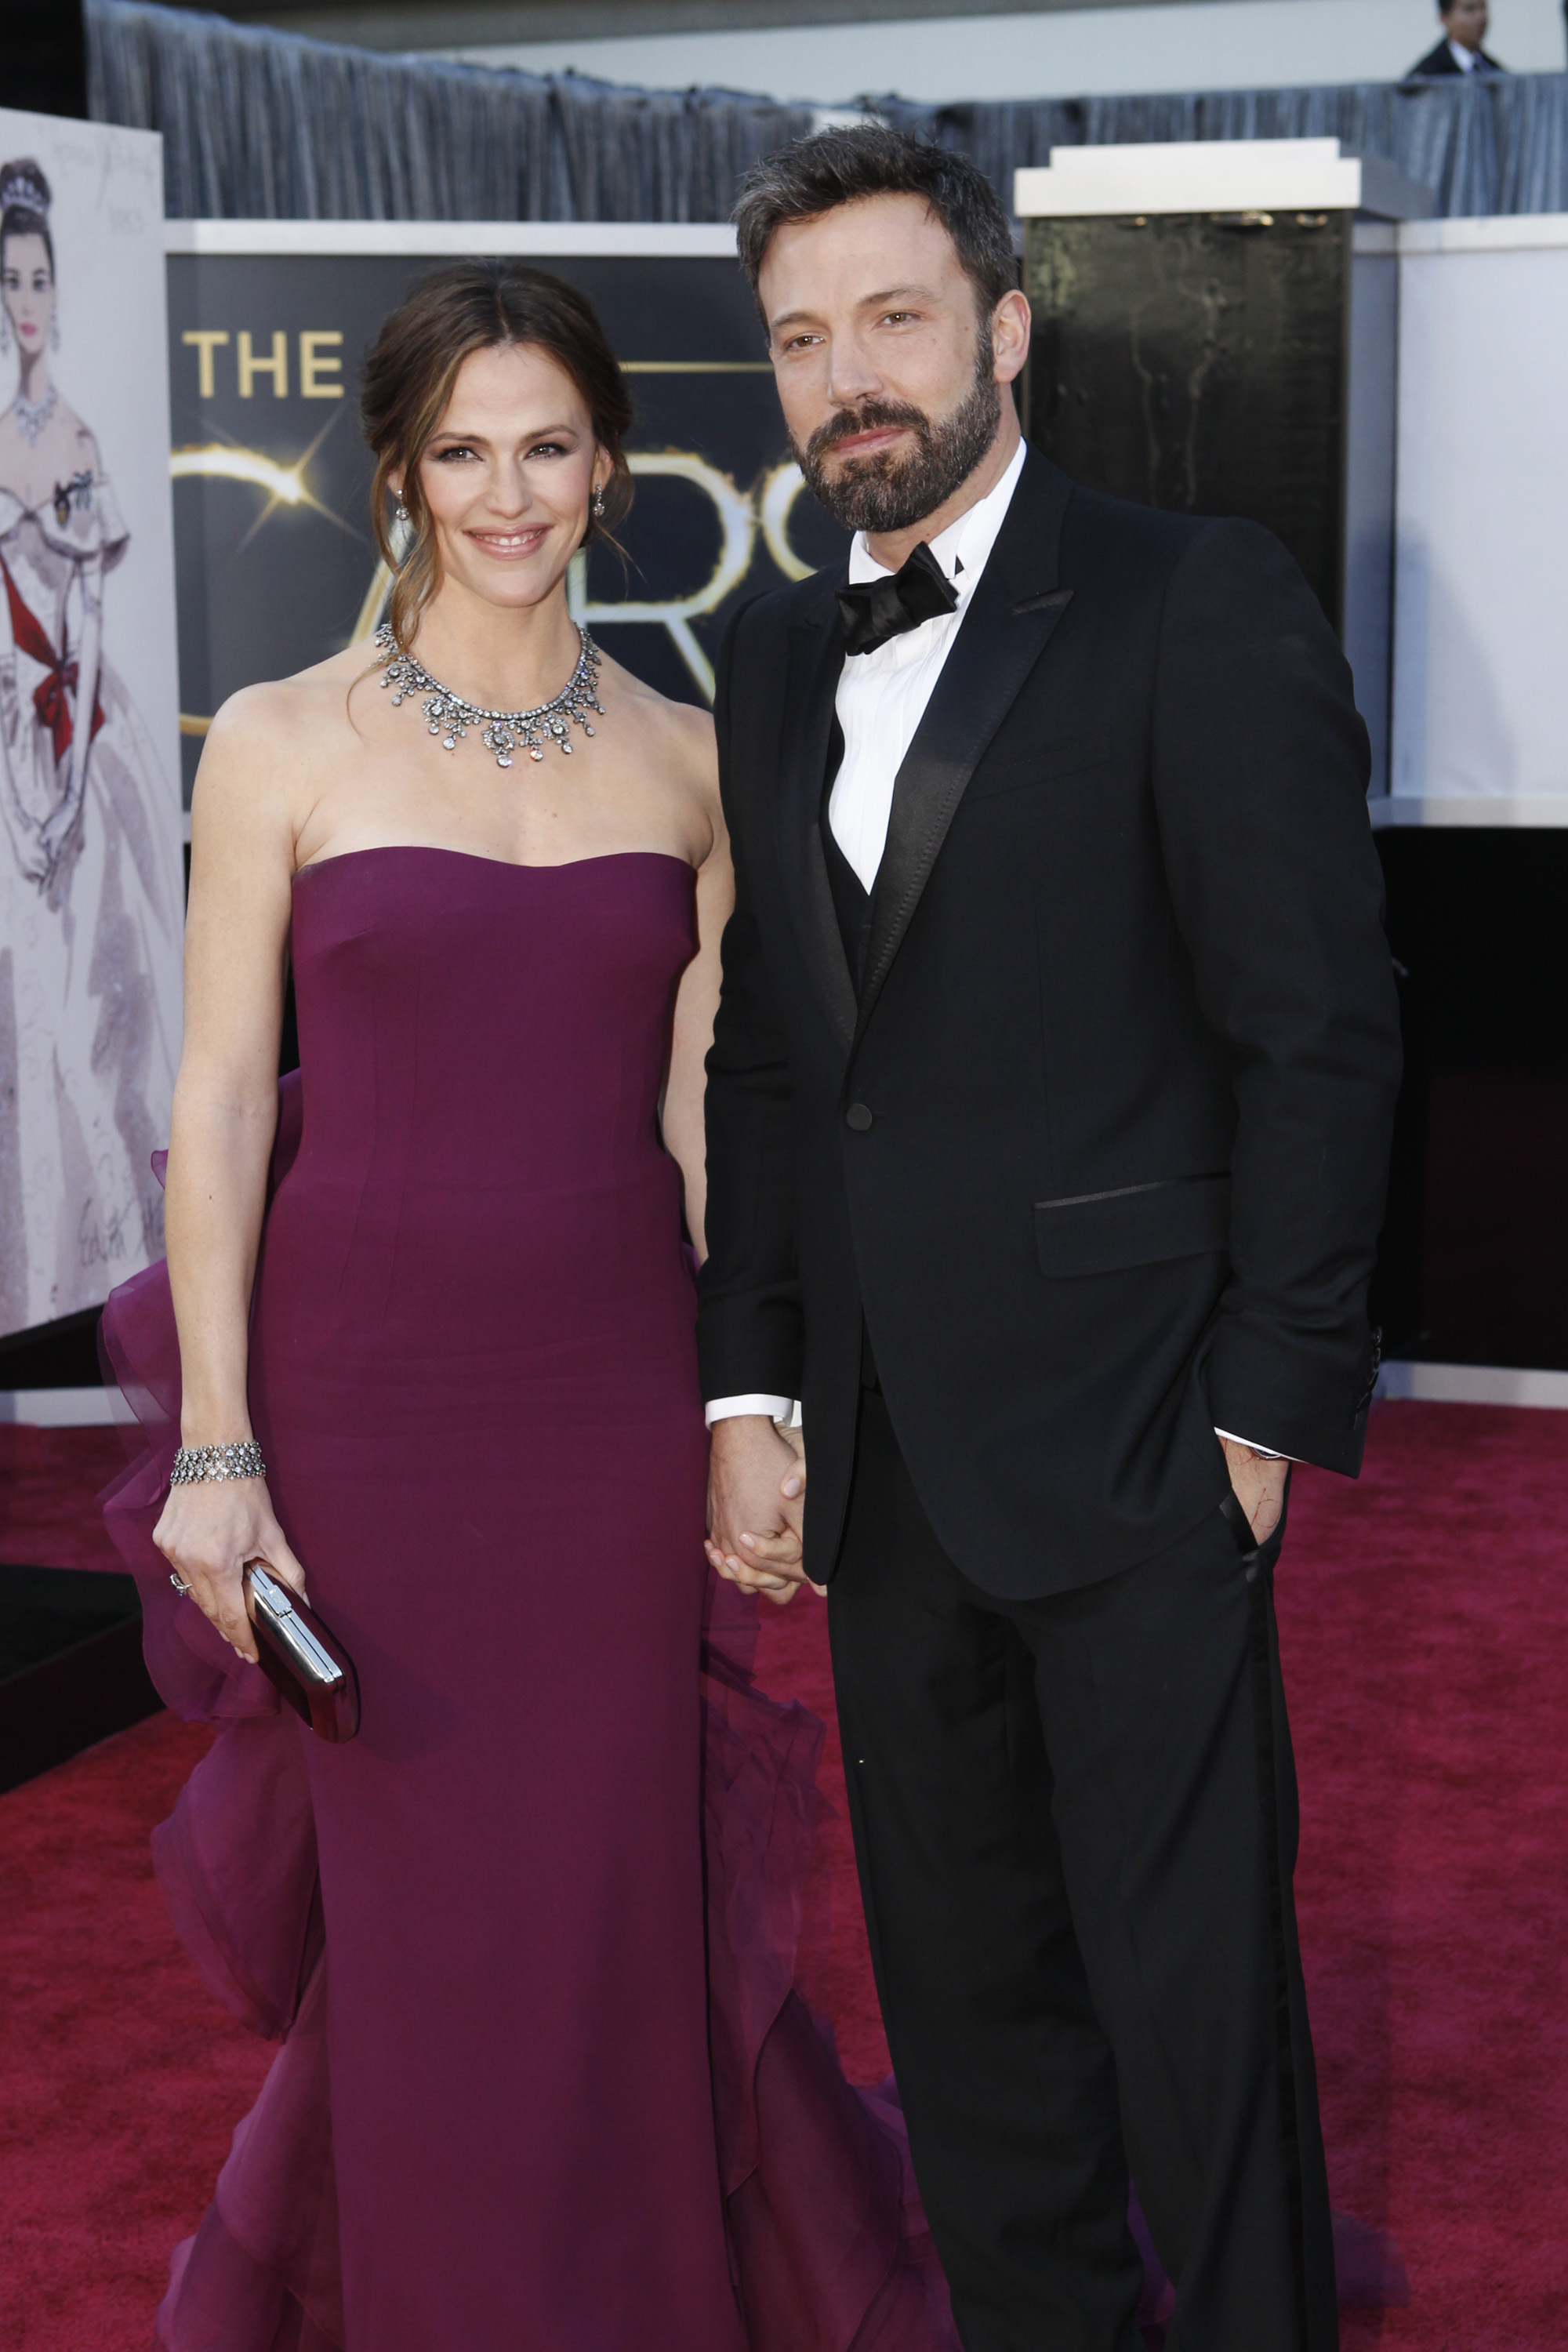 Jennifer Garner and Ben Affleck at the Oscars in Hollywood, Los Angeles on February 24, 2013 | Source: Getty Images